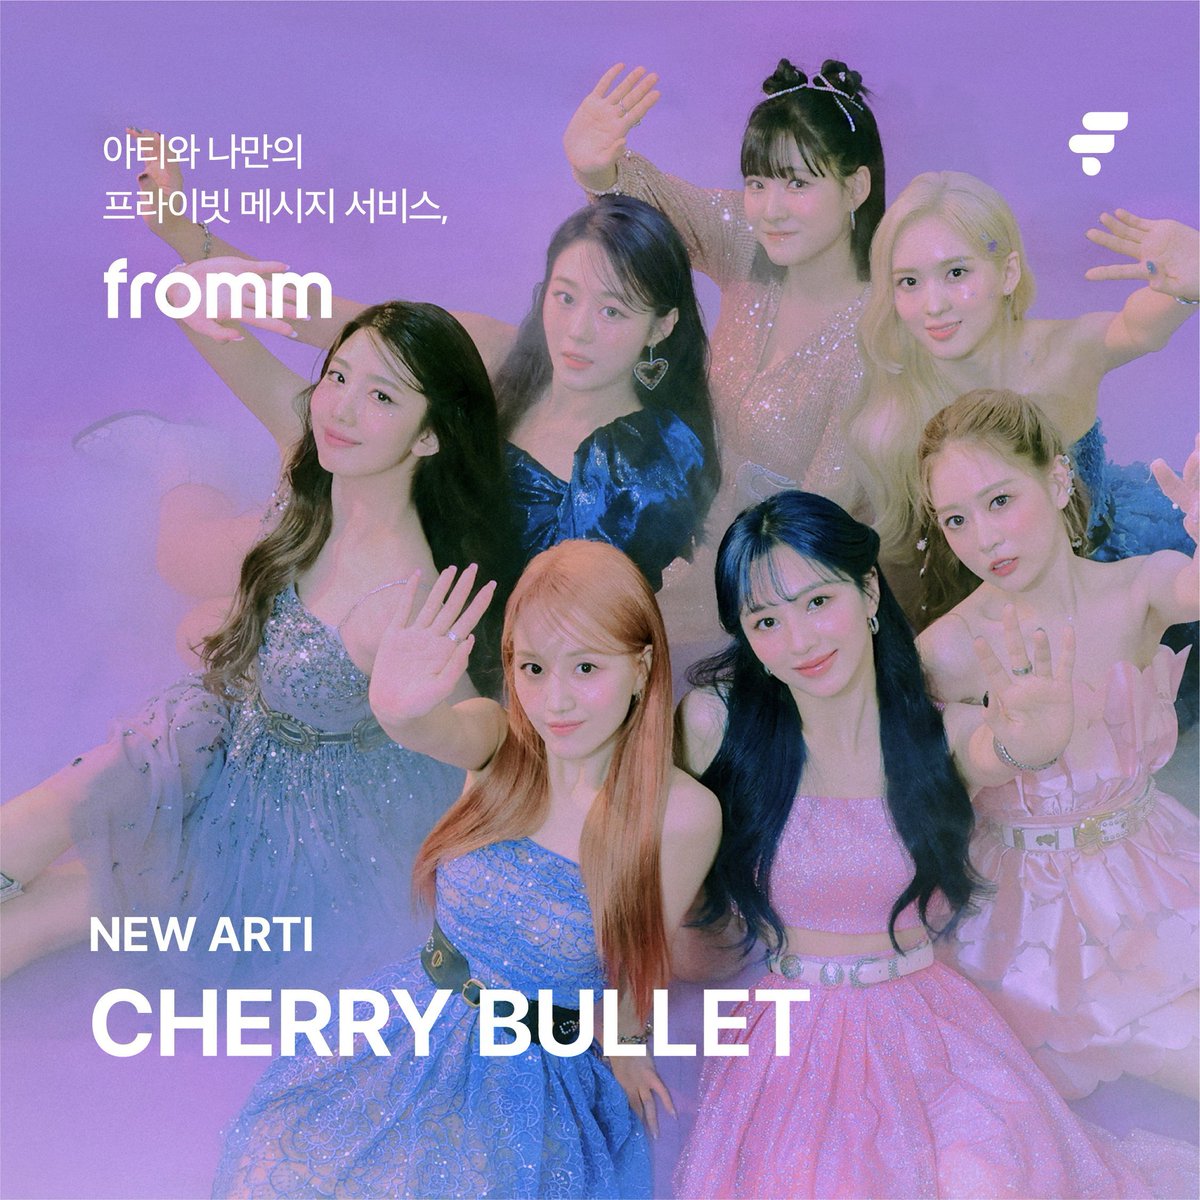 [ℹ️] After 502 days, @cherrybullet's contract with the Fromm app as officially ended.

 #CherryBullet #체리블렛